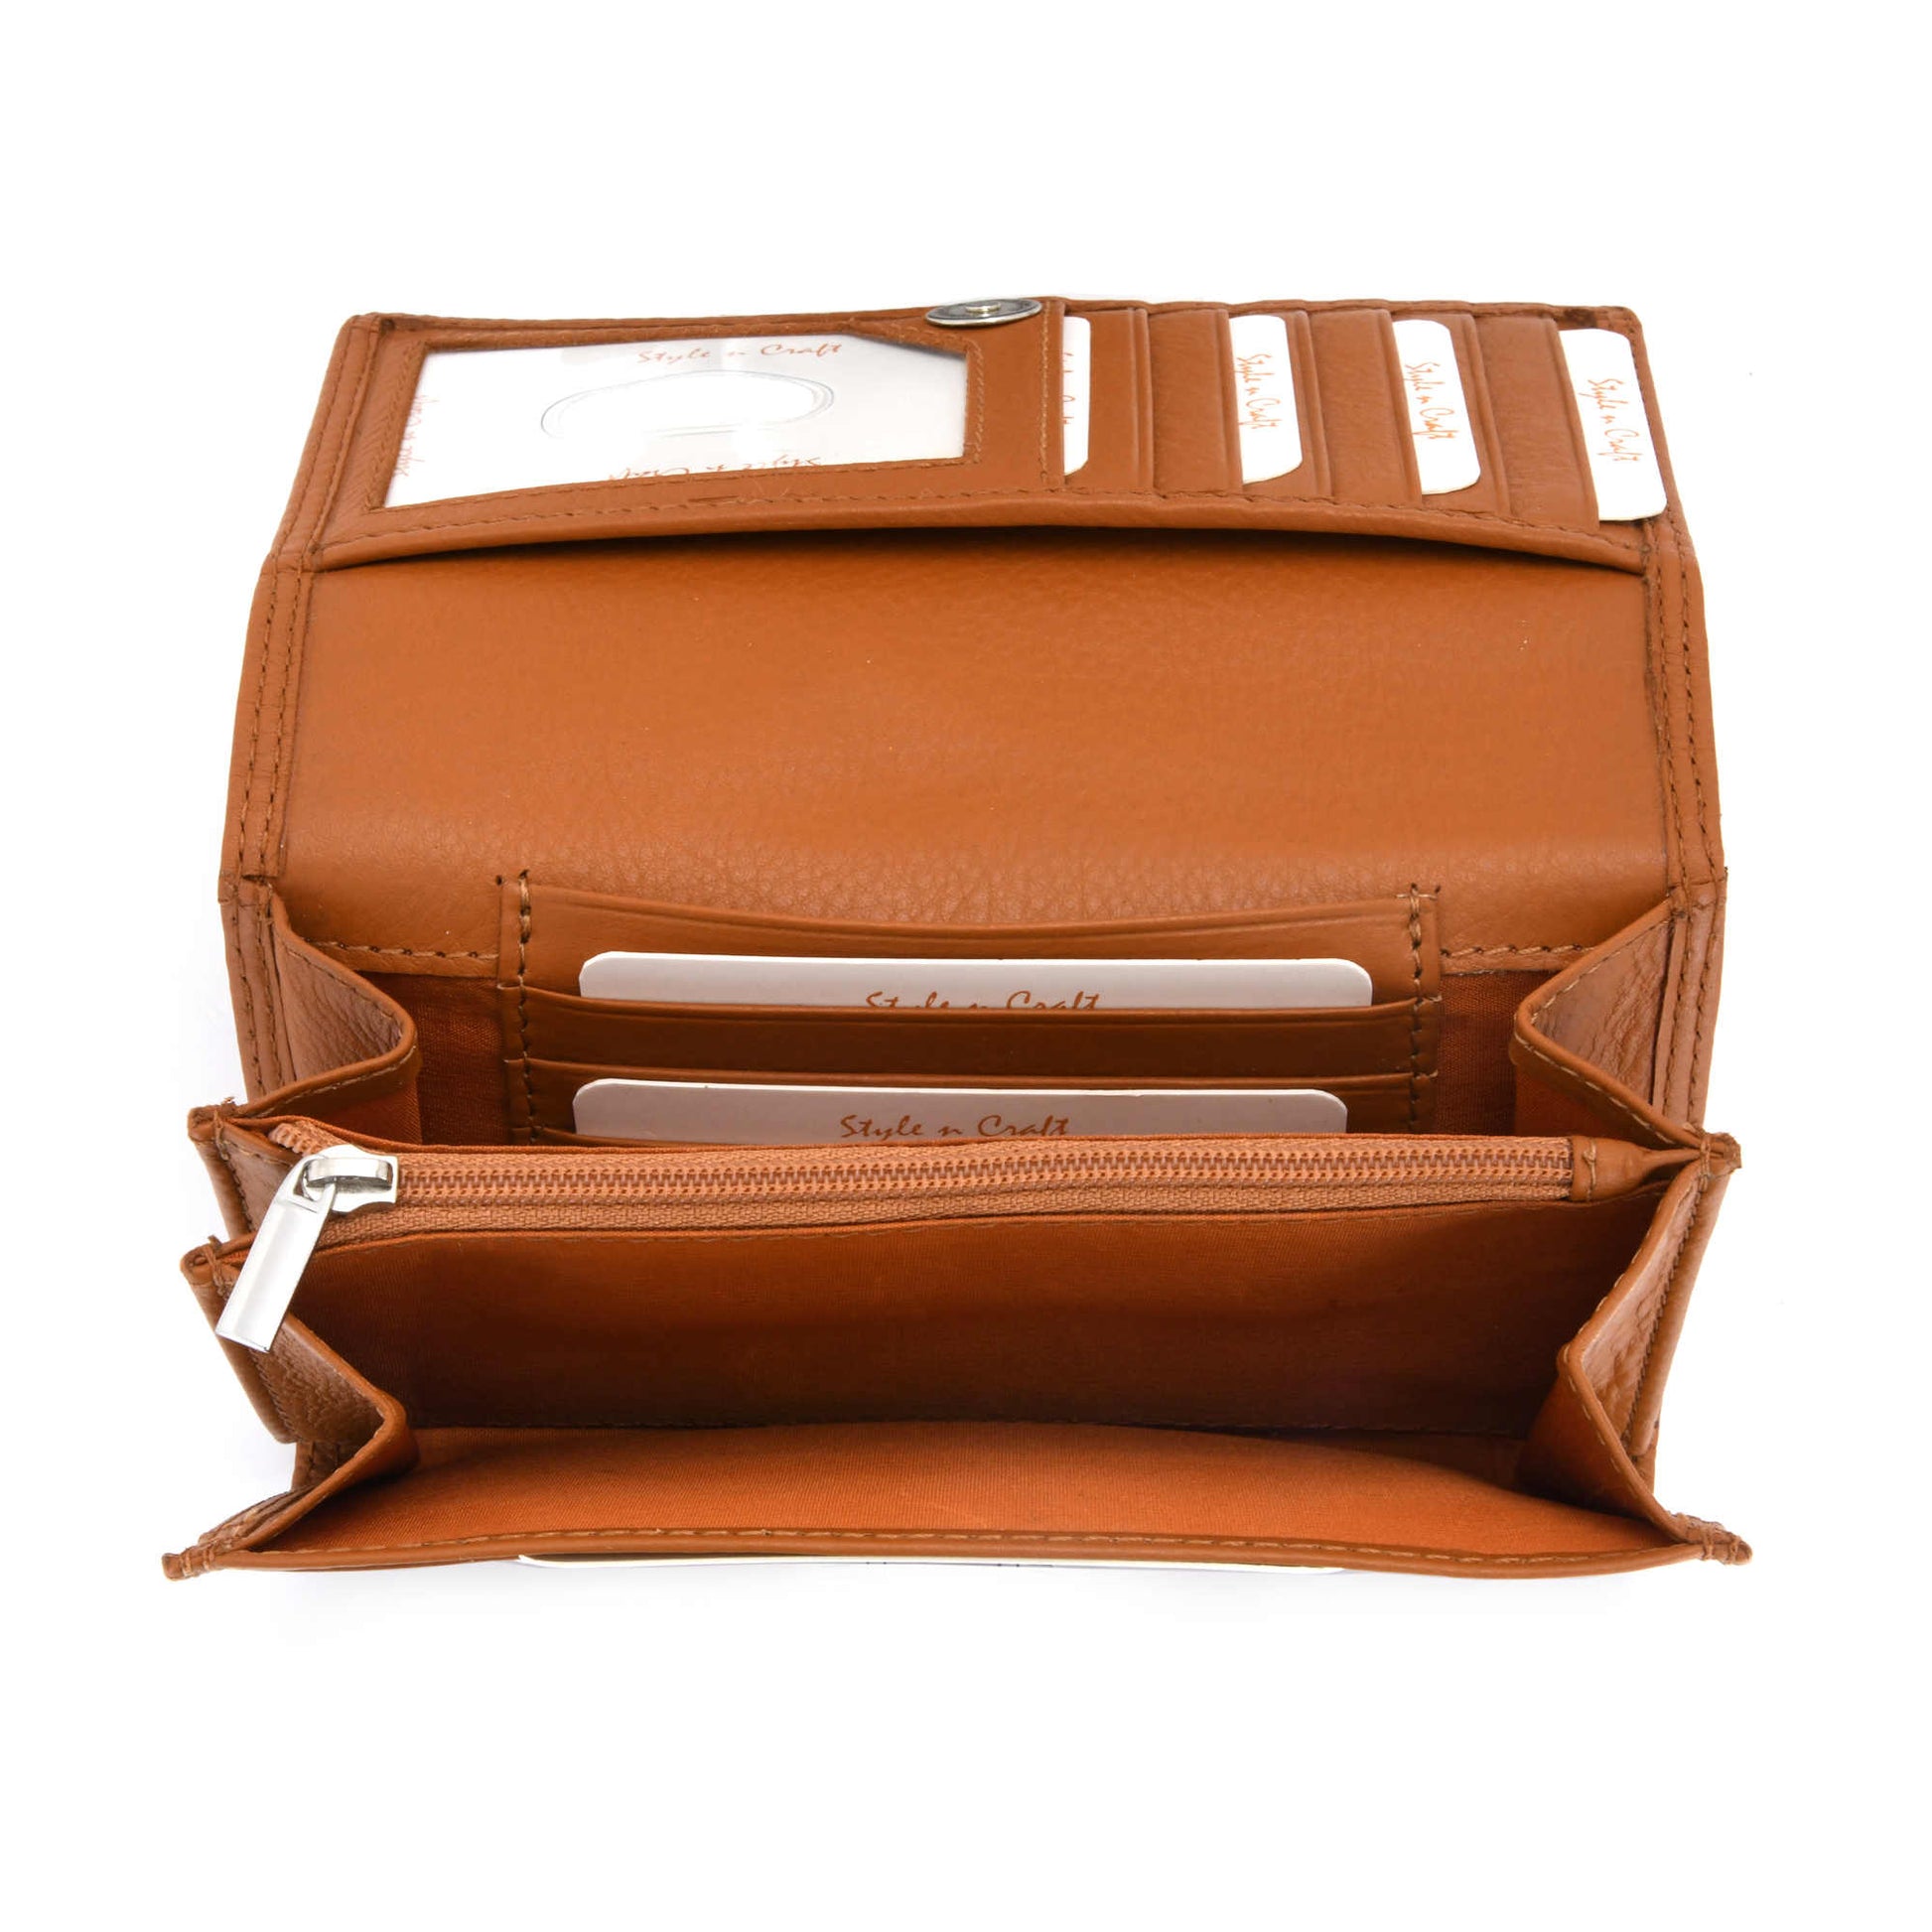 Style n Craft 300953-CG Ladies Clutch Wallet in Leather in Tan Color with RFID Protection - Front Open Straight Picture Showing Detailed Inside View